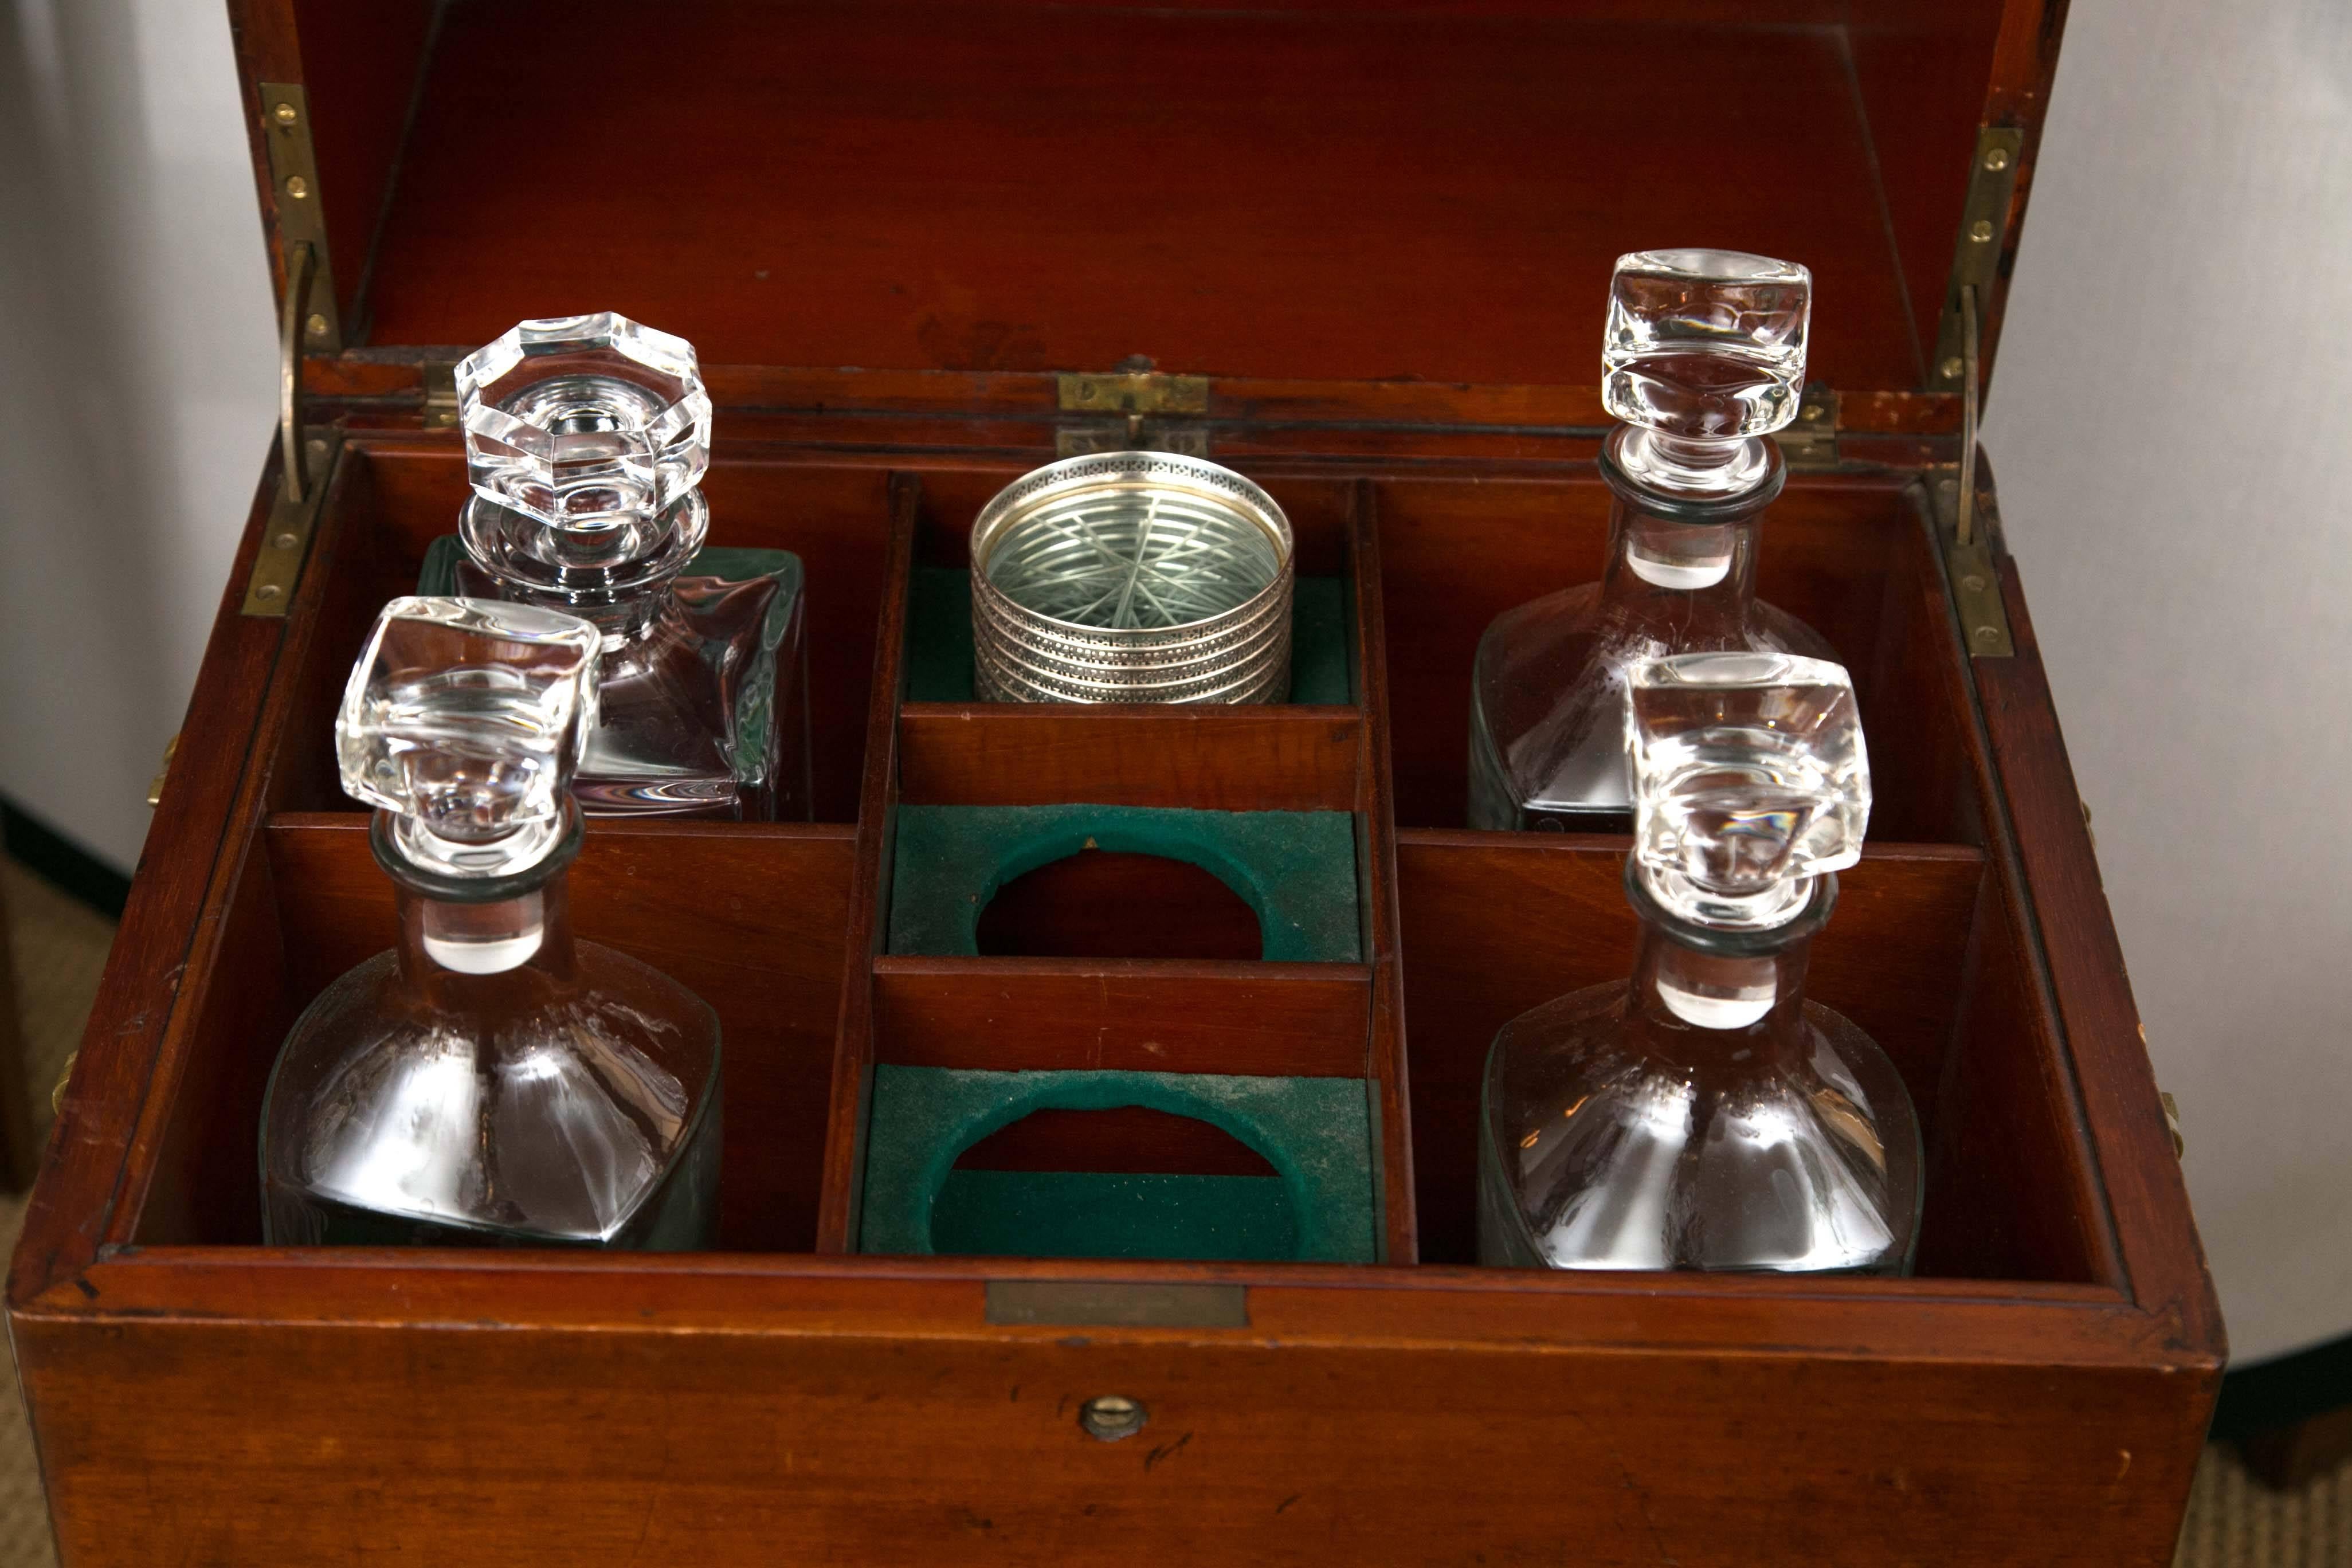 A stunning solid mahogany rolling dry bar. The lid opens to reveal compartments for decanters and coasters. The drawer below includes glasses. The third-drawer is a humidor by C.N. Swift of New York. 
The bottom two drawers are made for a variety